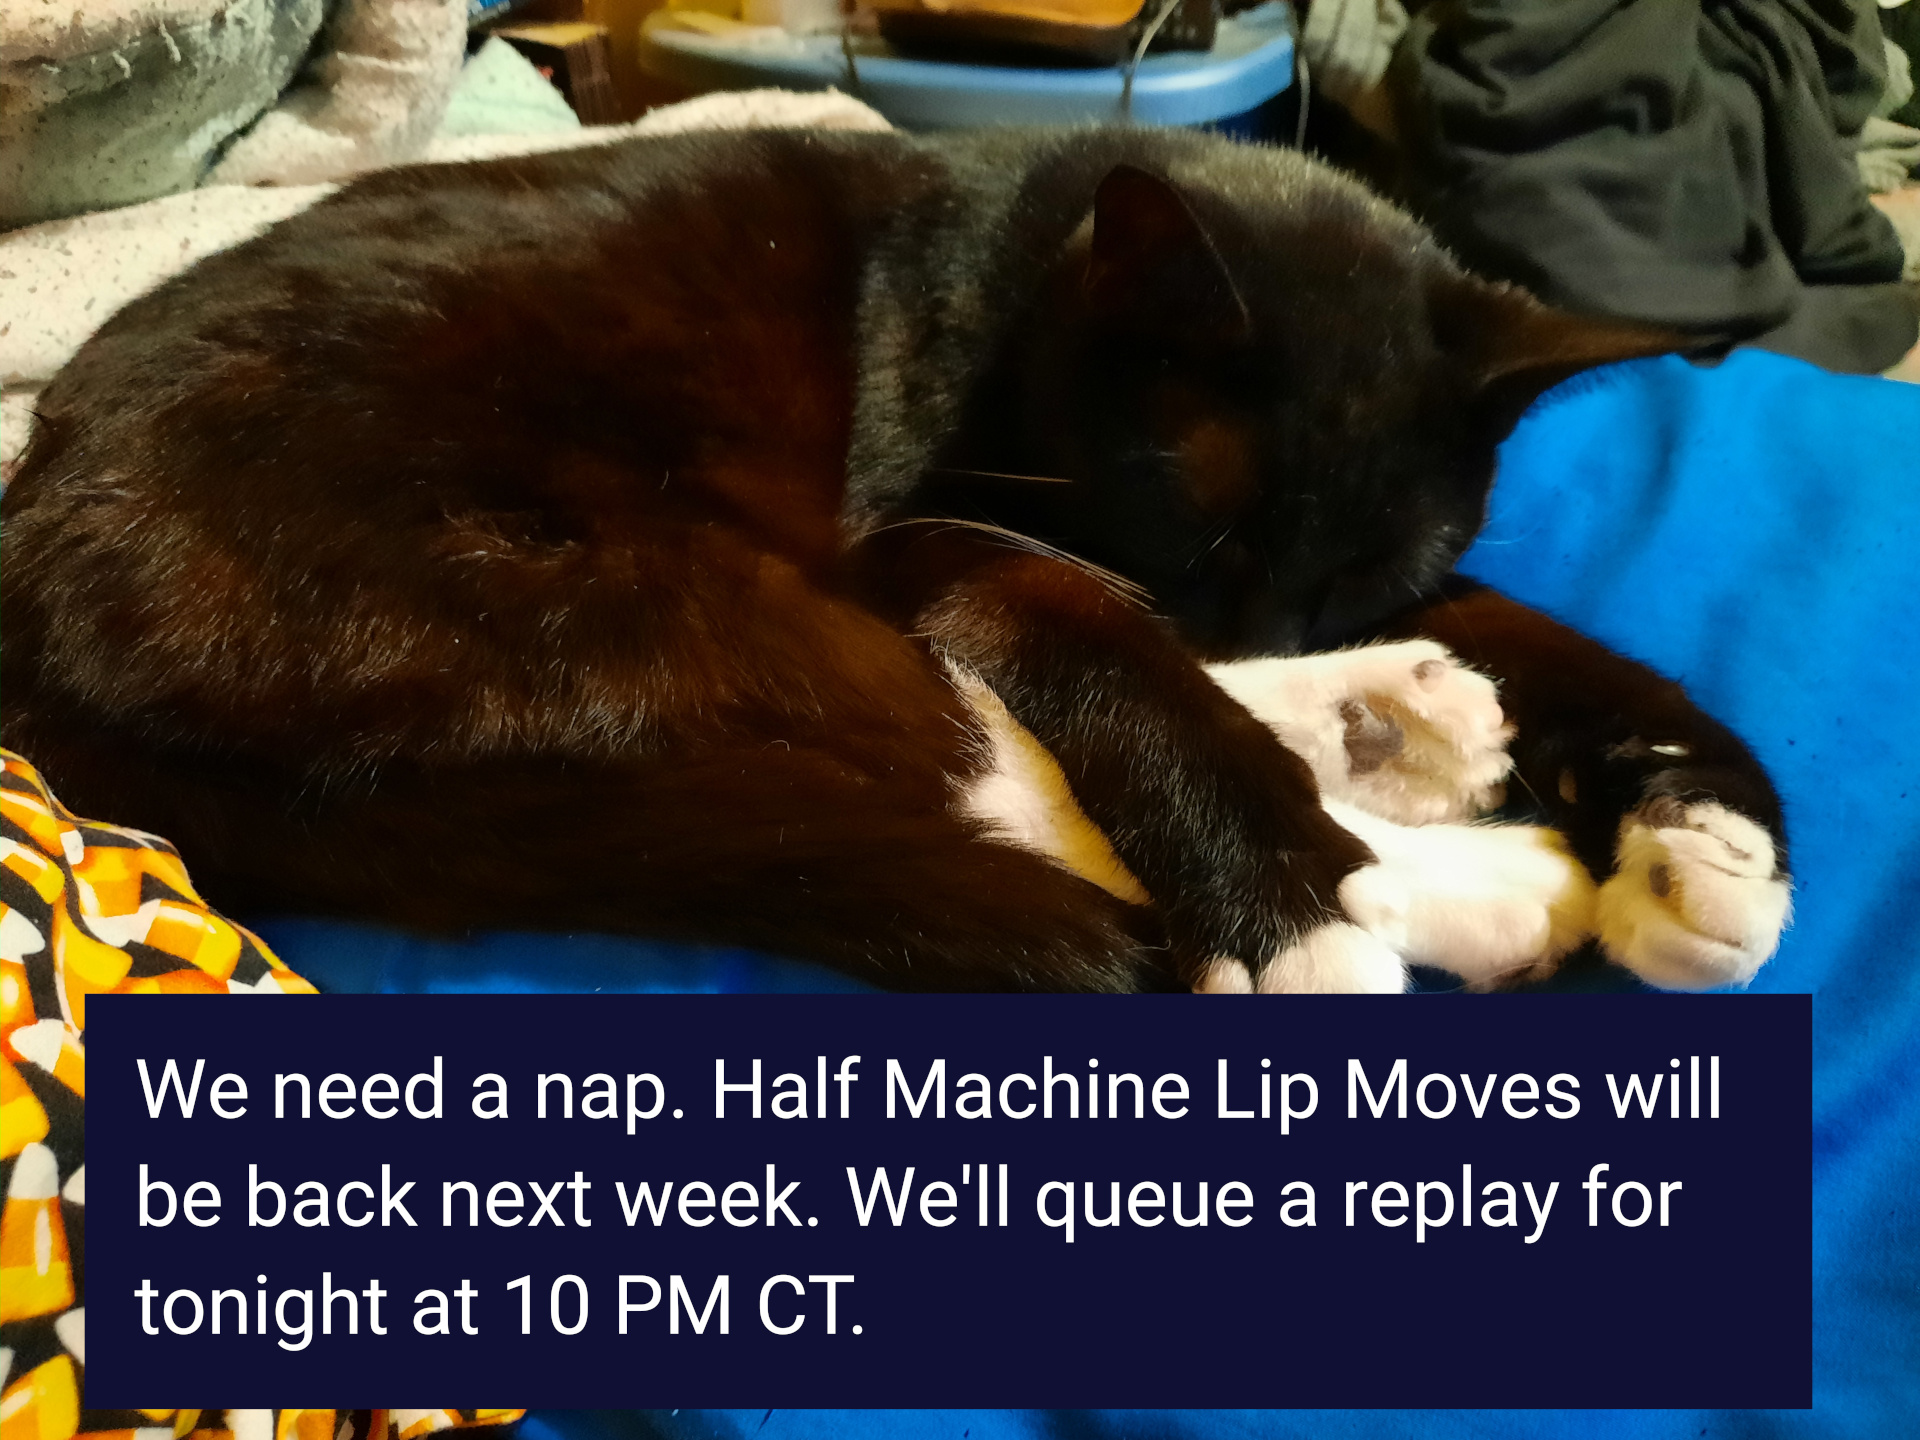 The picture shows a tuxedo cat, curled up and sleeping on a pillow. There is a dark blue box with inside it that says, &ldquo;We need a nap. Half Machine Lip Moves will be back next week. We&rsquo;ll queue up a replay tonight at 10 PM CT.&rdquo;